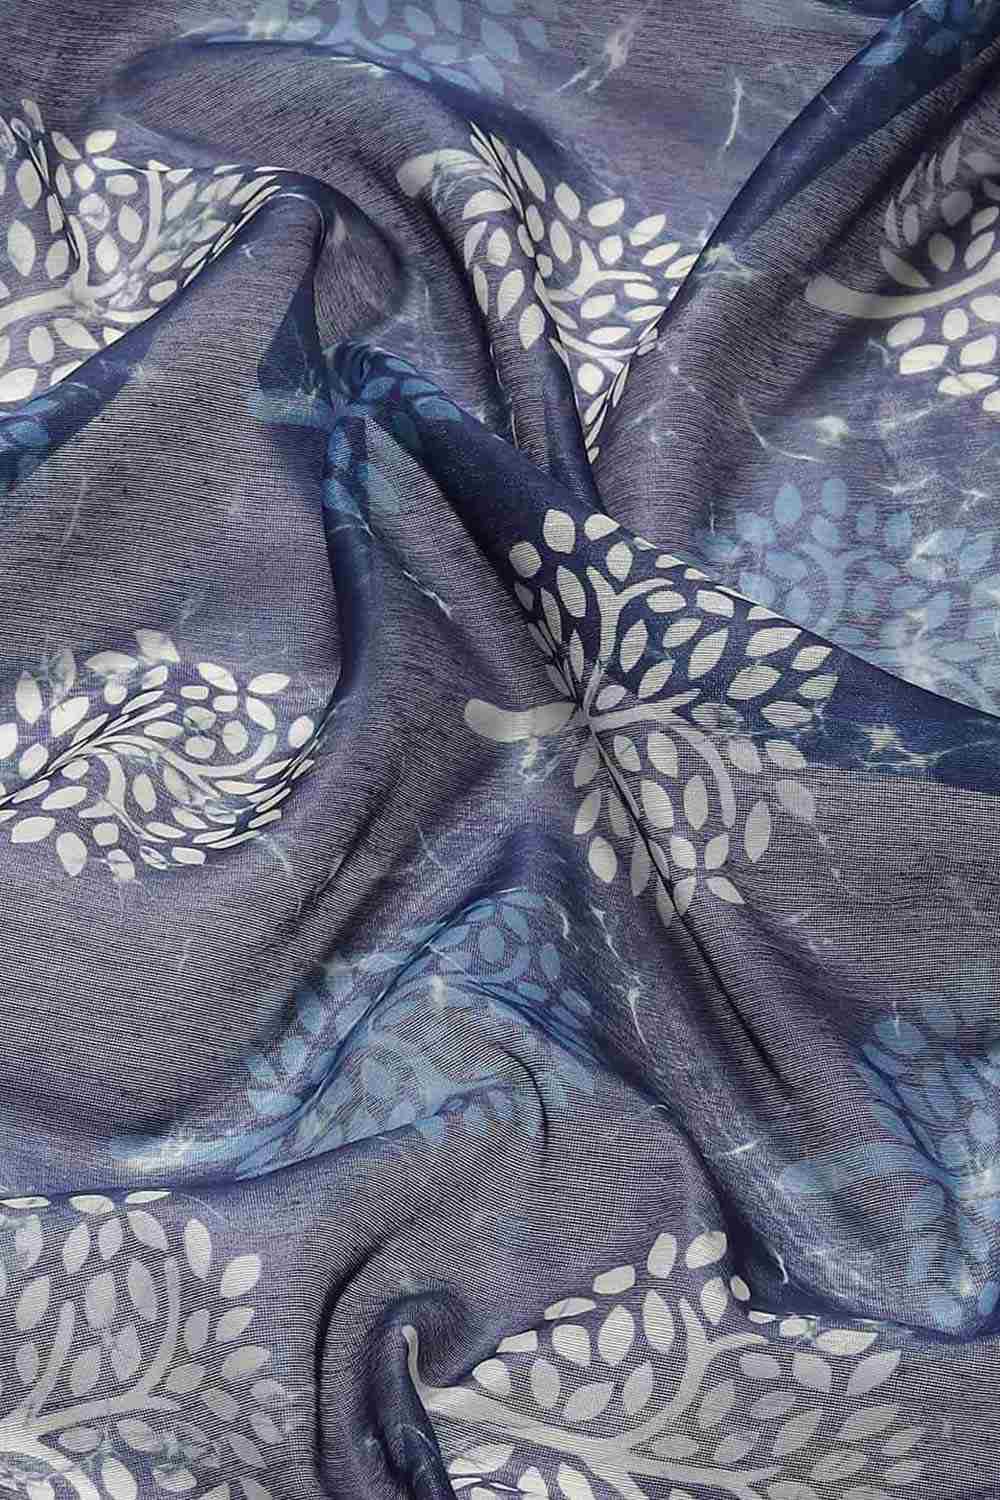 Buy Blue Cotton Block Printed Saree Online - Zoom Out 